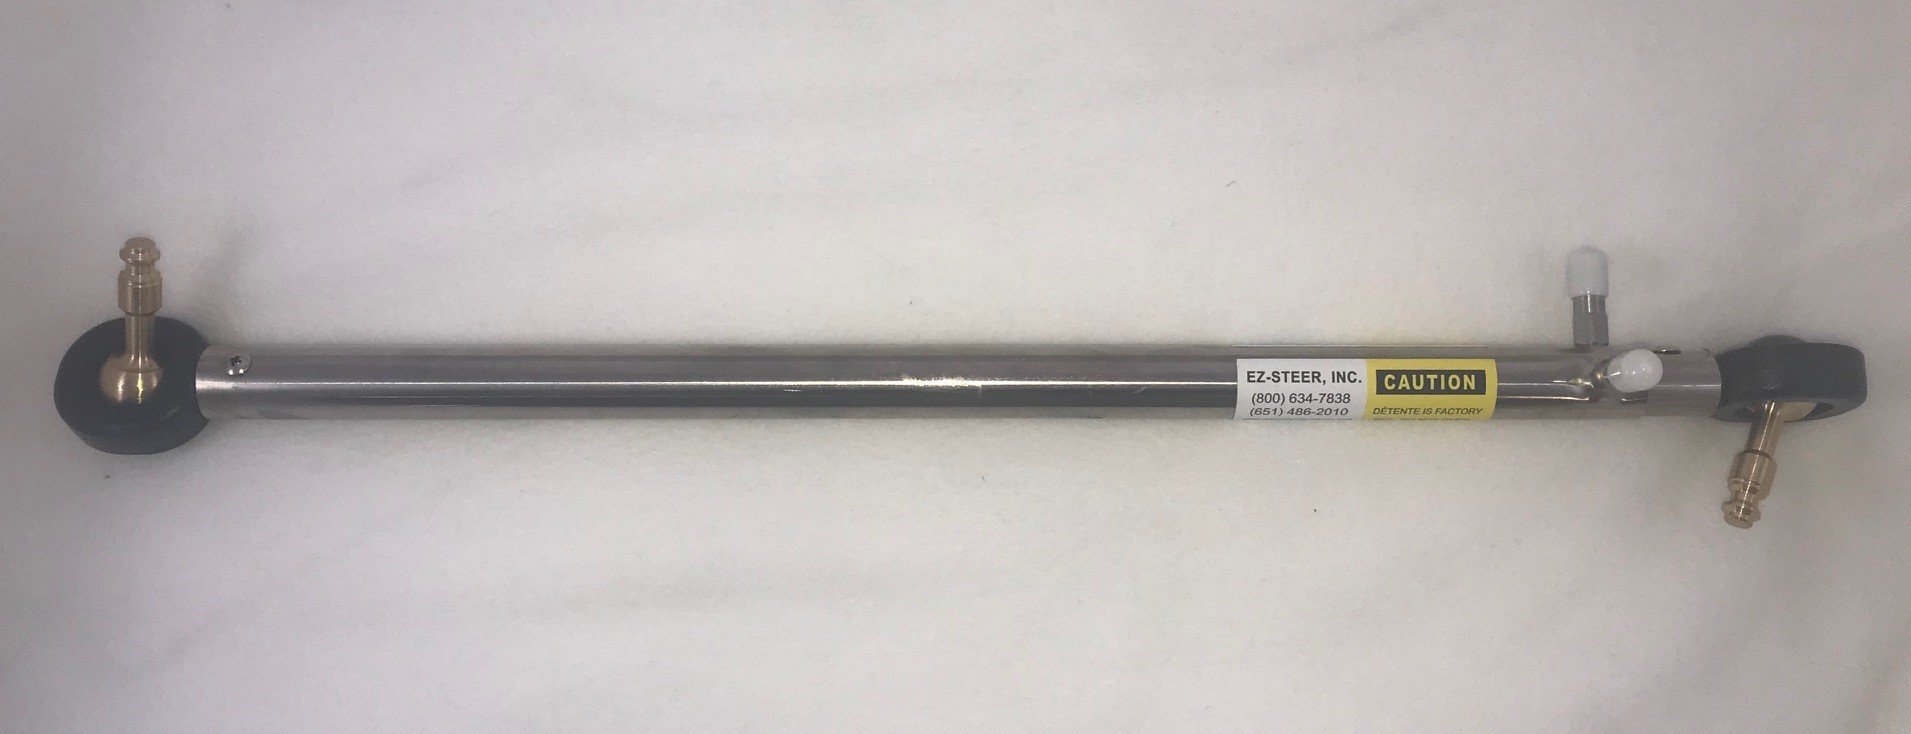 EZ-Steer Complete Rod Assembly - Medium, 27in-28in - shop.cmpgroup.net